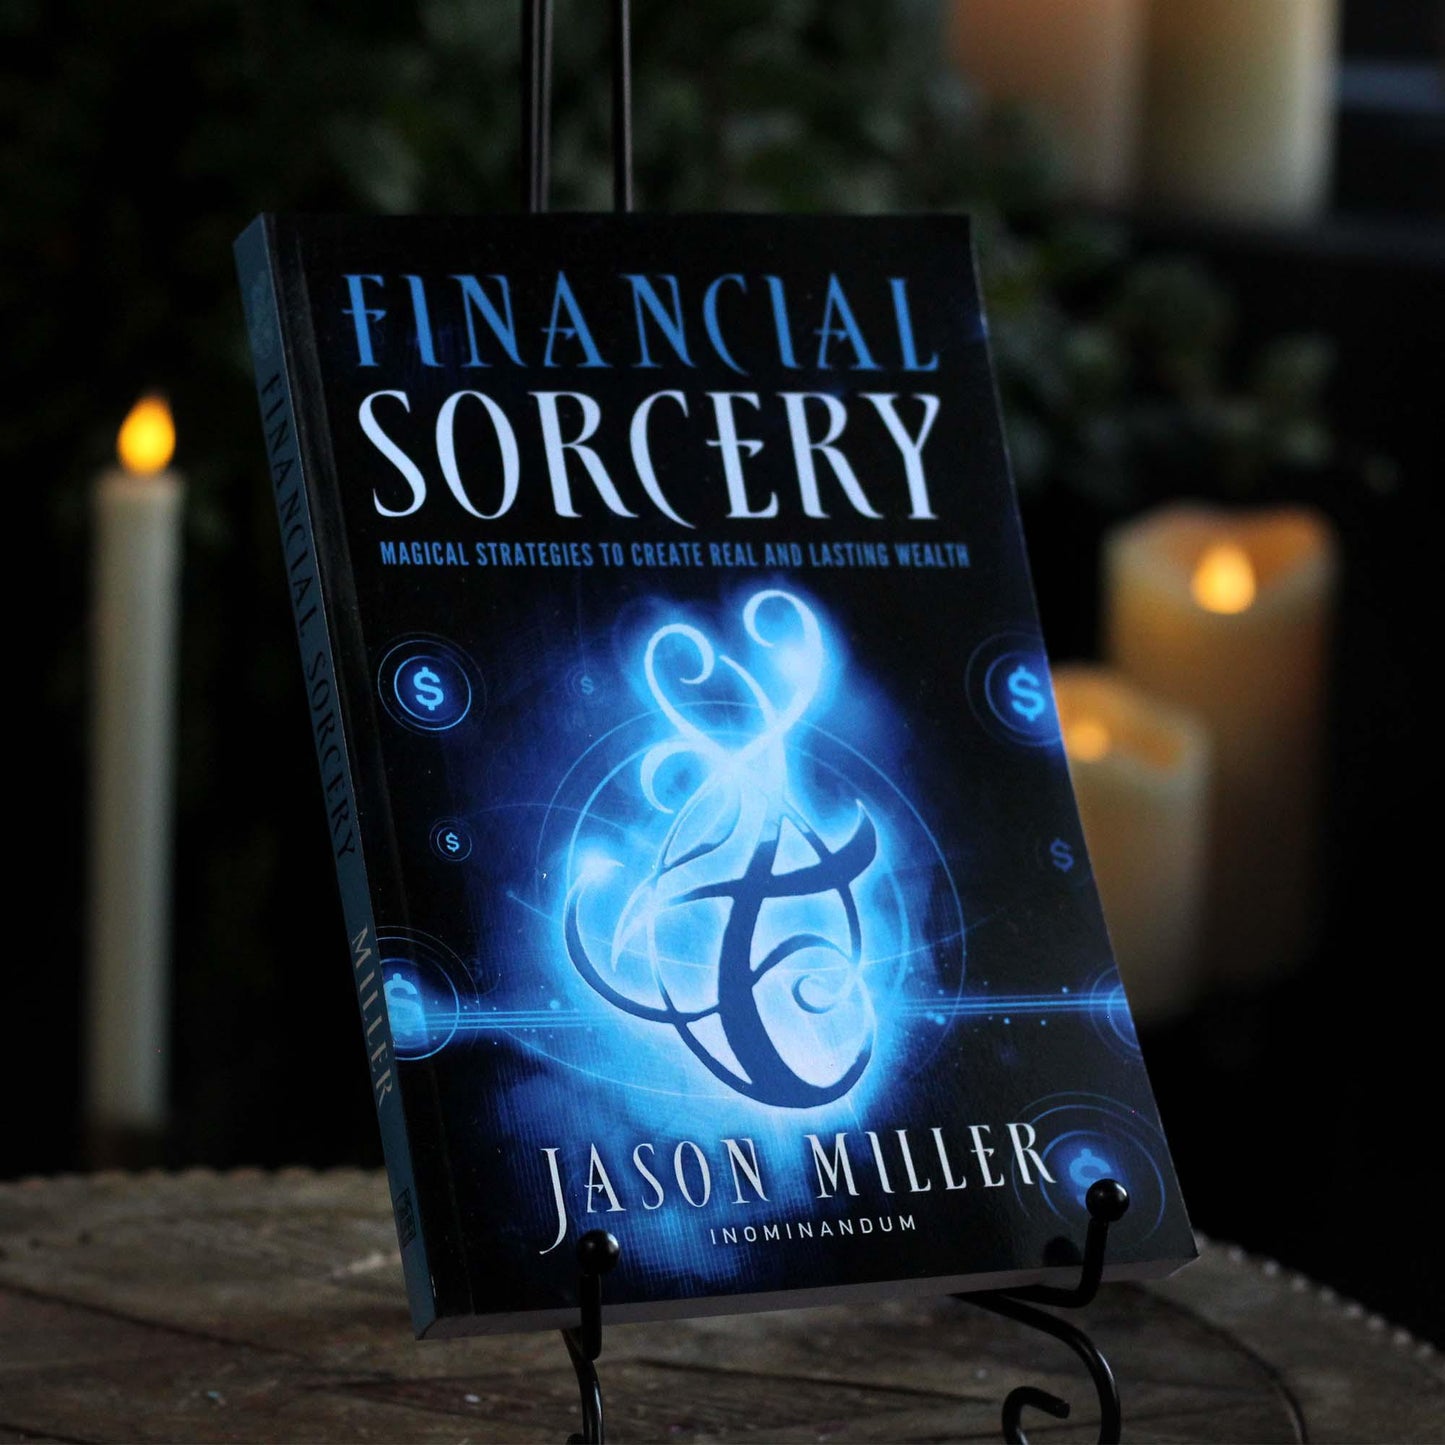 FINANCIAL SOURCERY